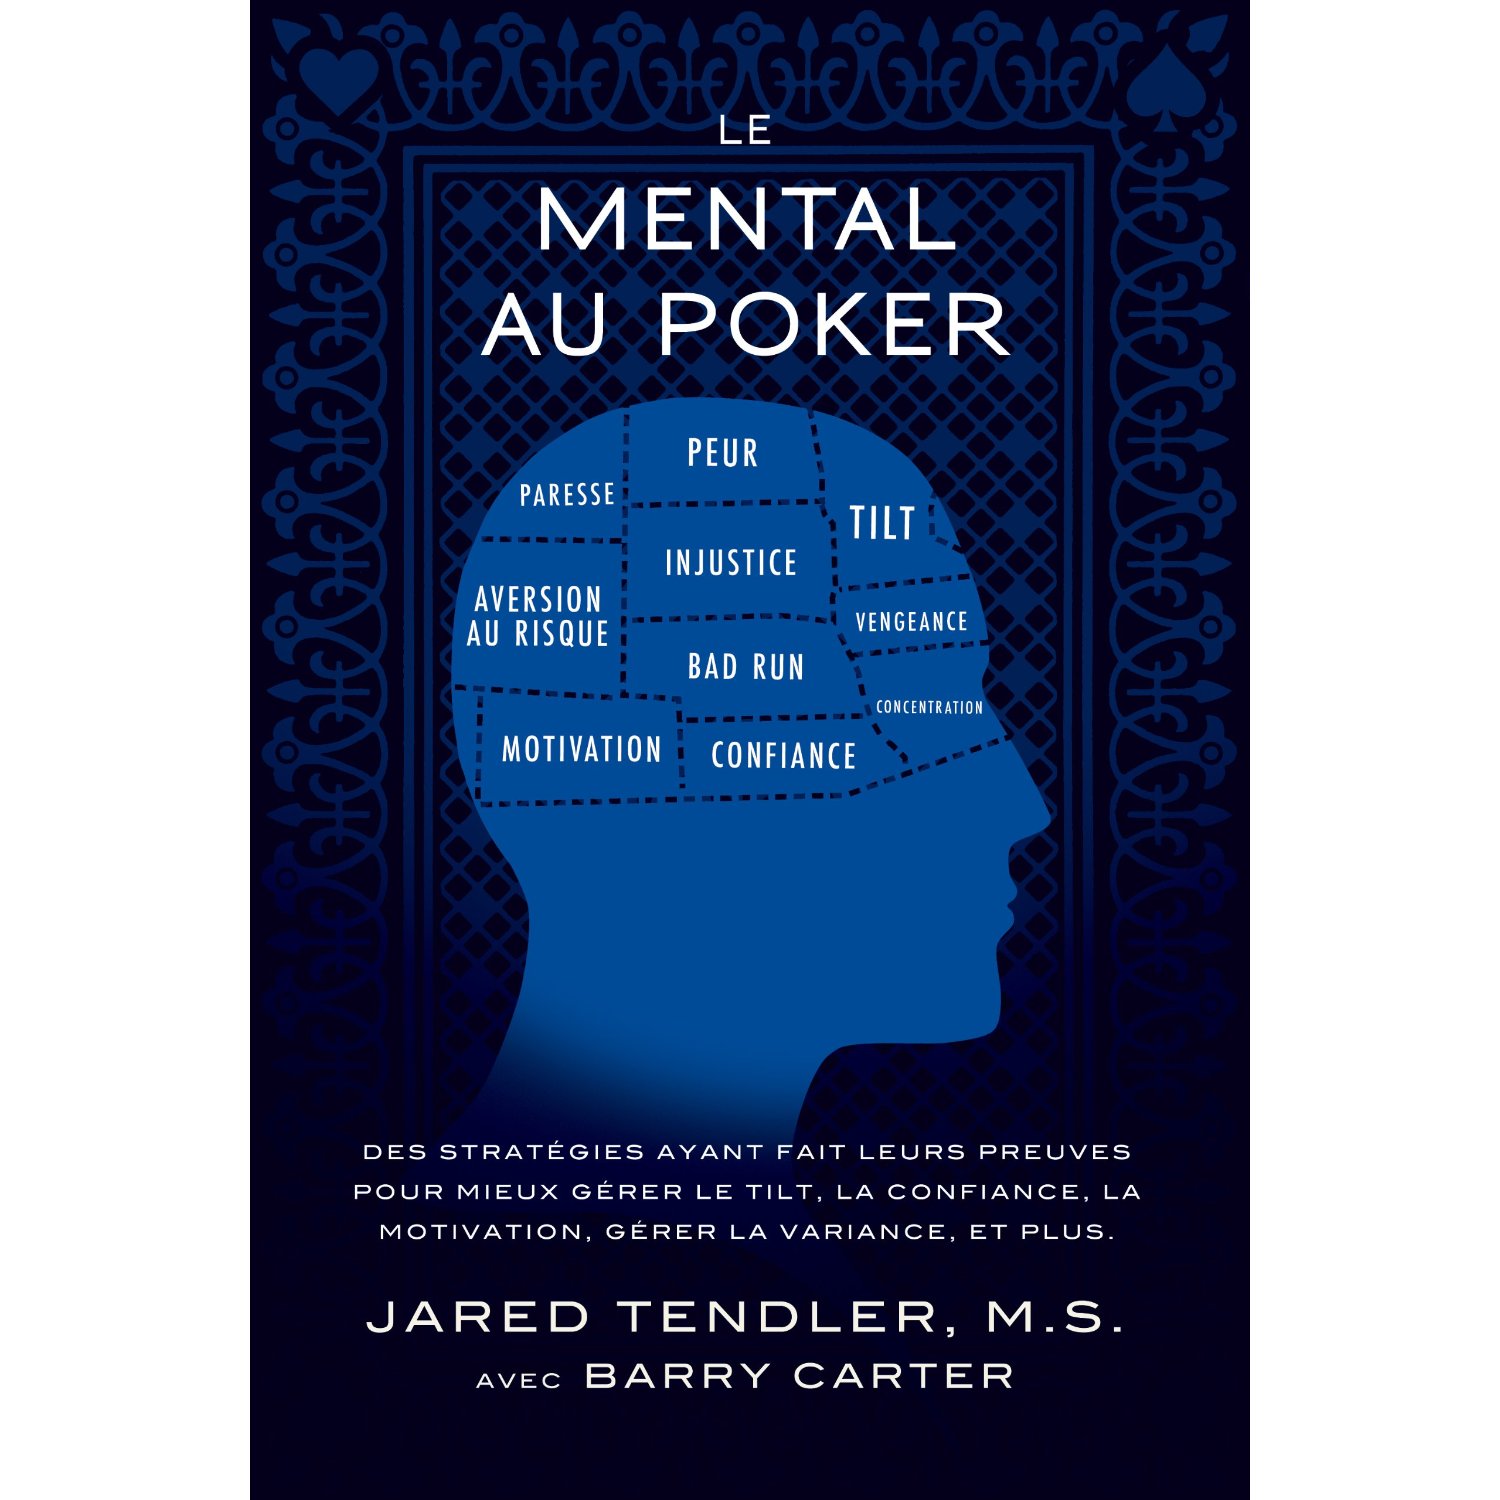 The Mental Game of Poker; Finally available in french!